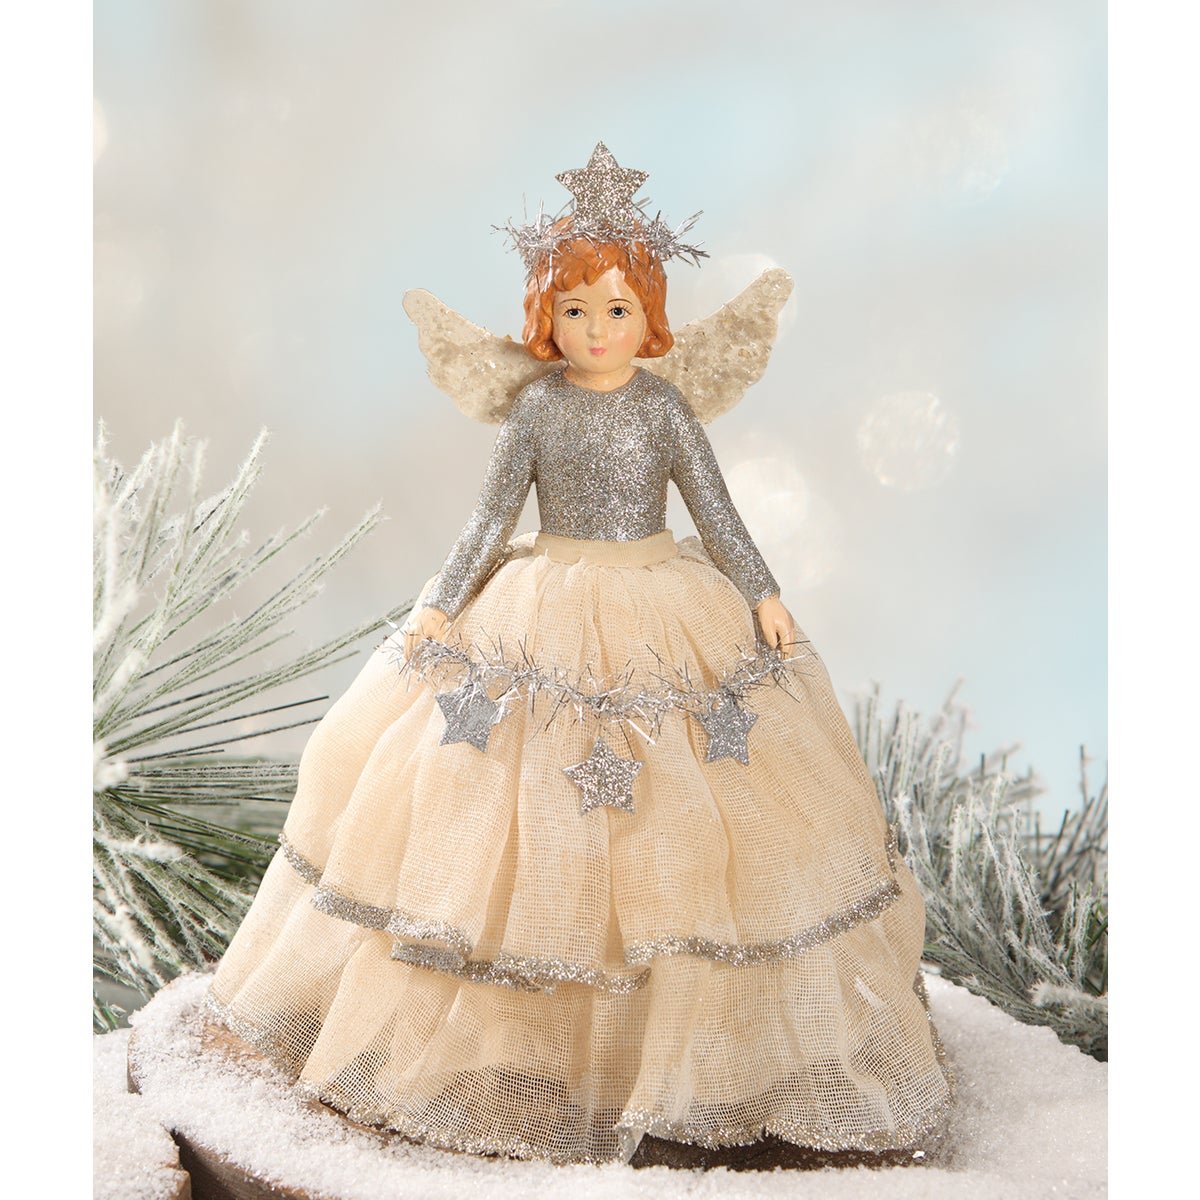 Bethany Lowe Christmas Tree Flea Market Angel Tree Topper - The Primitive Pineapple Collection